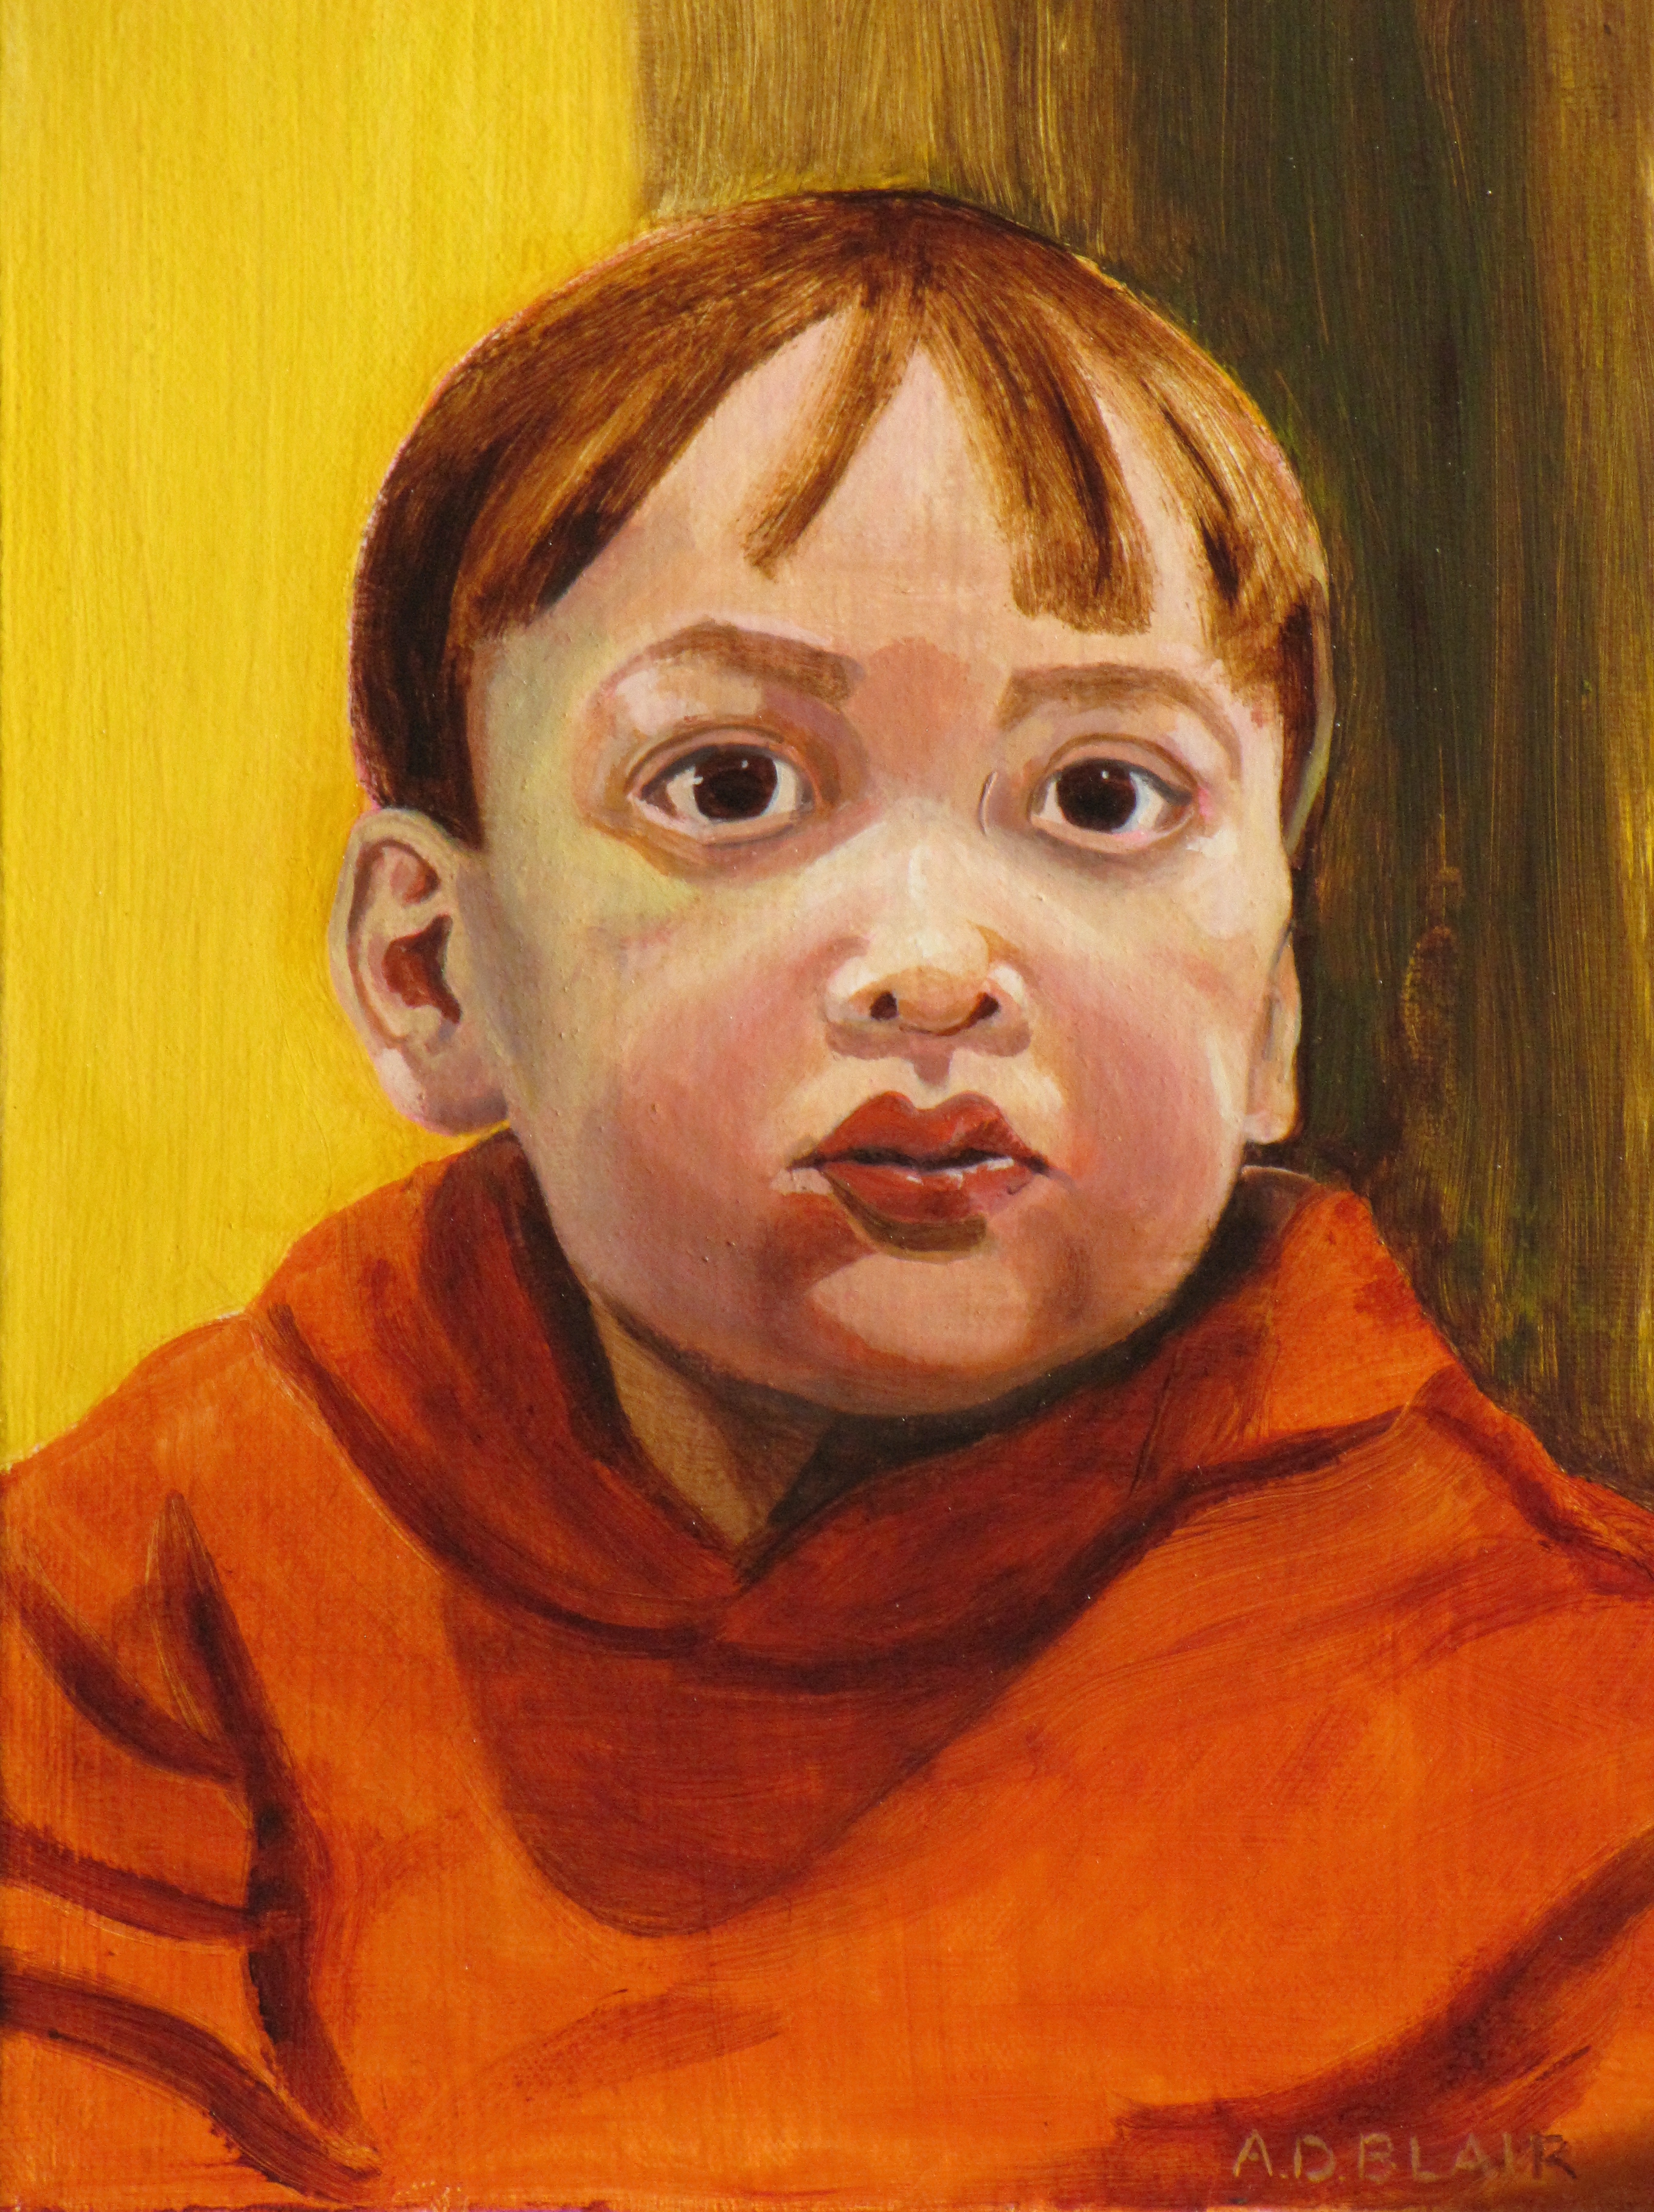 Portrait 03 - oil on canvas, 9" x 12" - SOLD